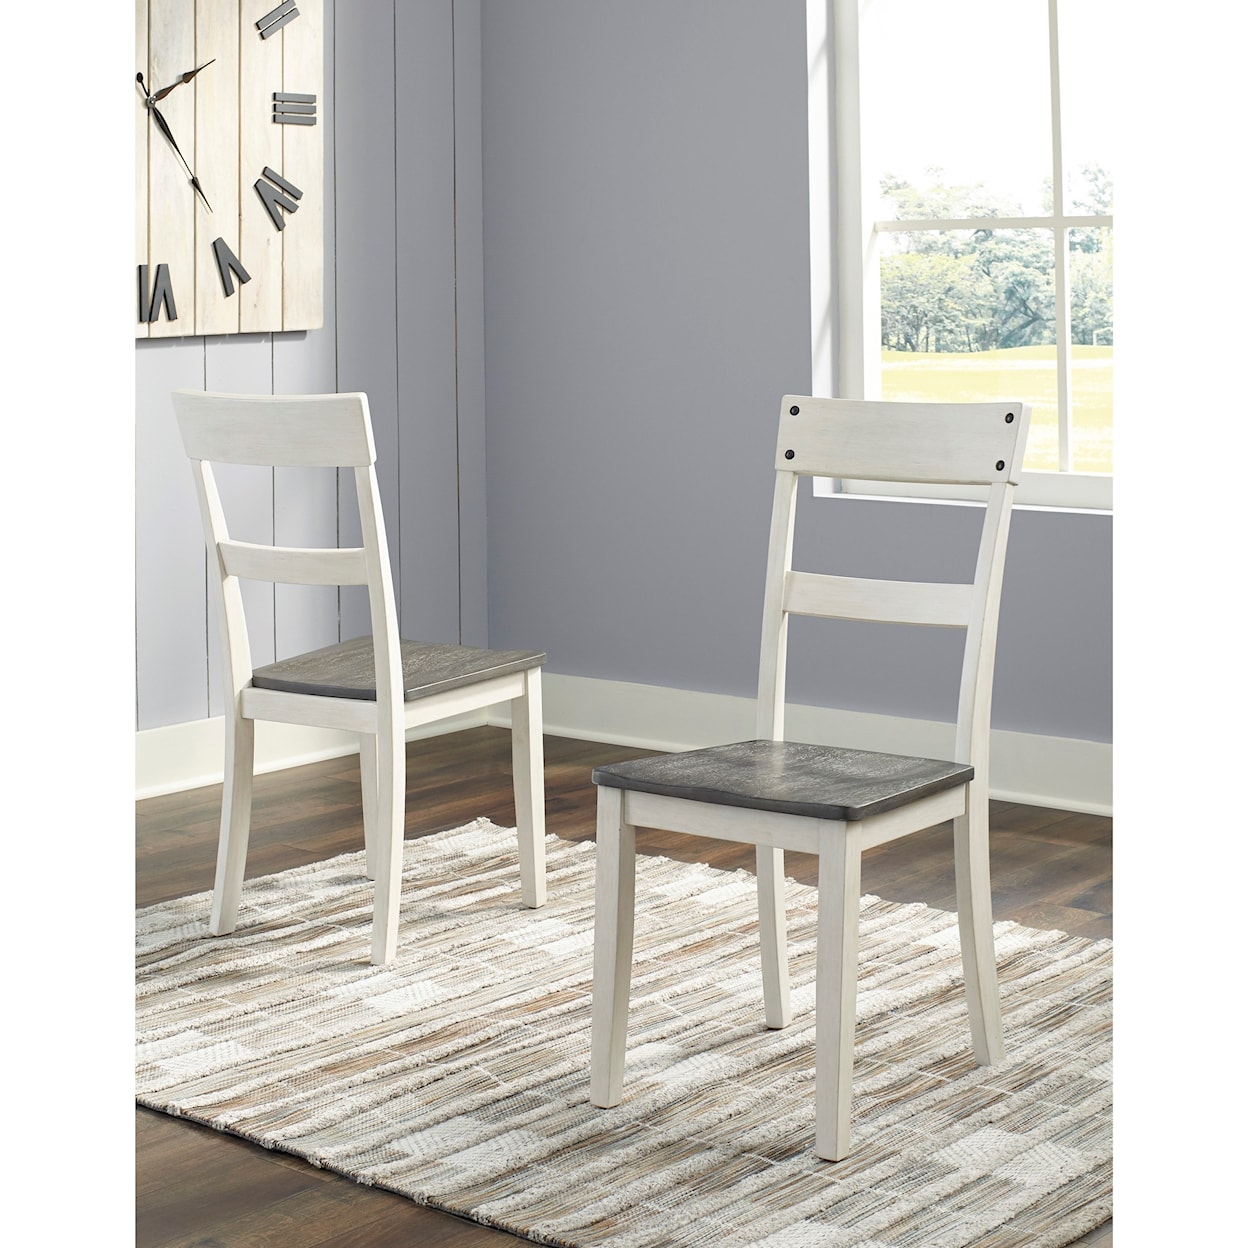 Signature Design by Ashley Furniture Nelling Dining Room Side Chair